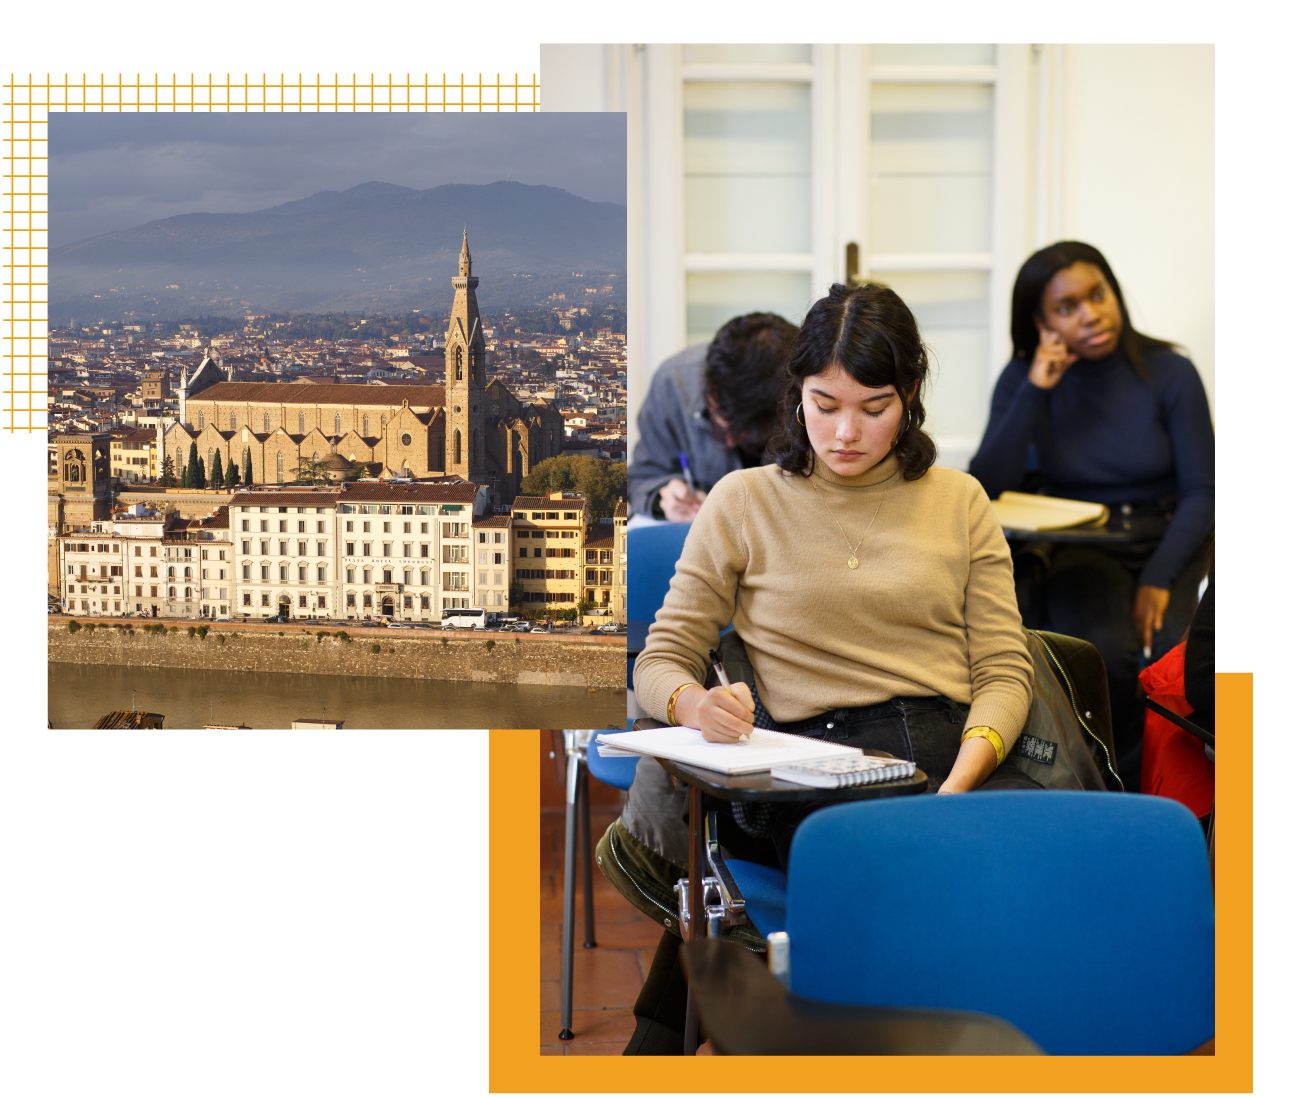 A collage: 1) A bird’s eye view of Florence. 2) A group of students sitting in a classroom.